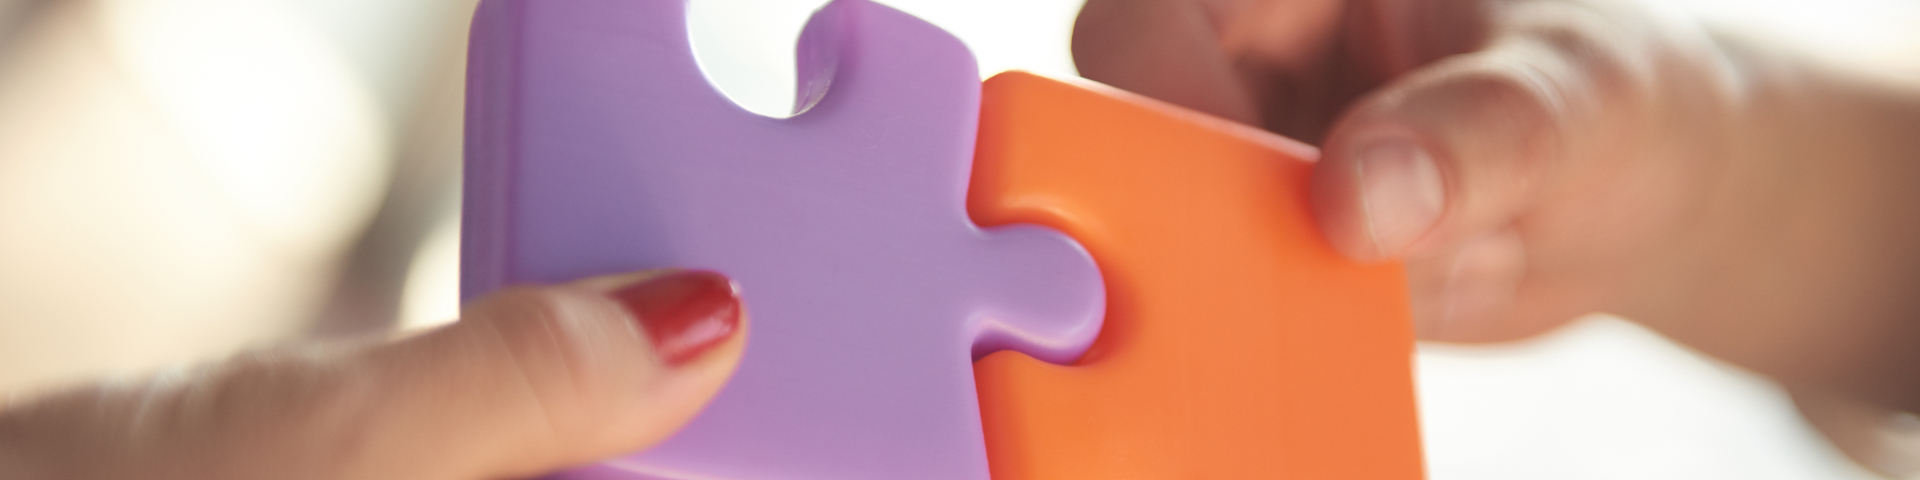 image of two people holding a jigsaw piece and each and putting together